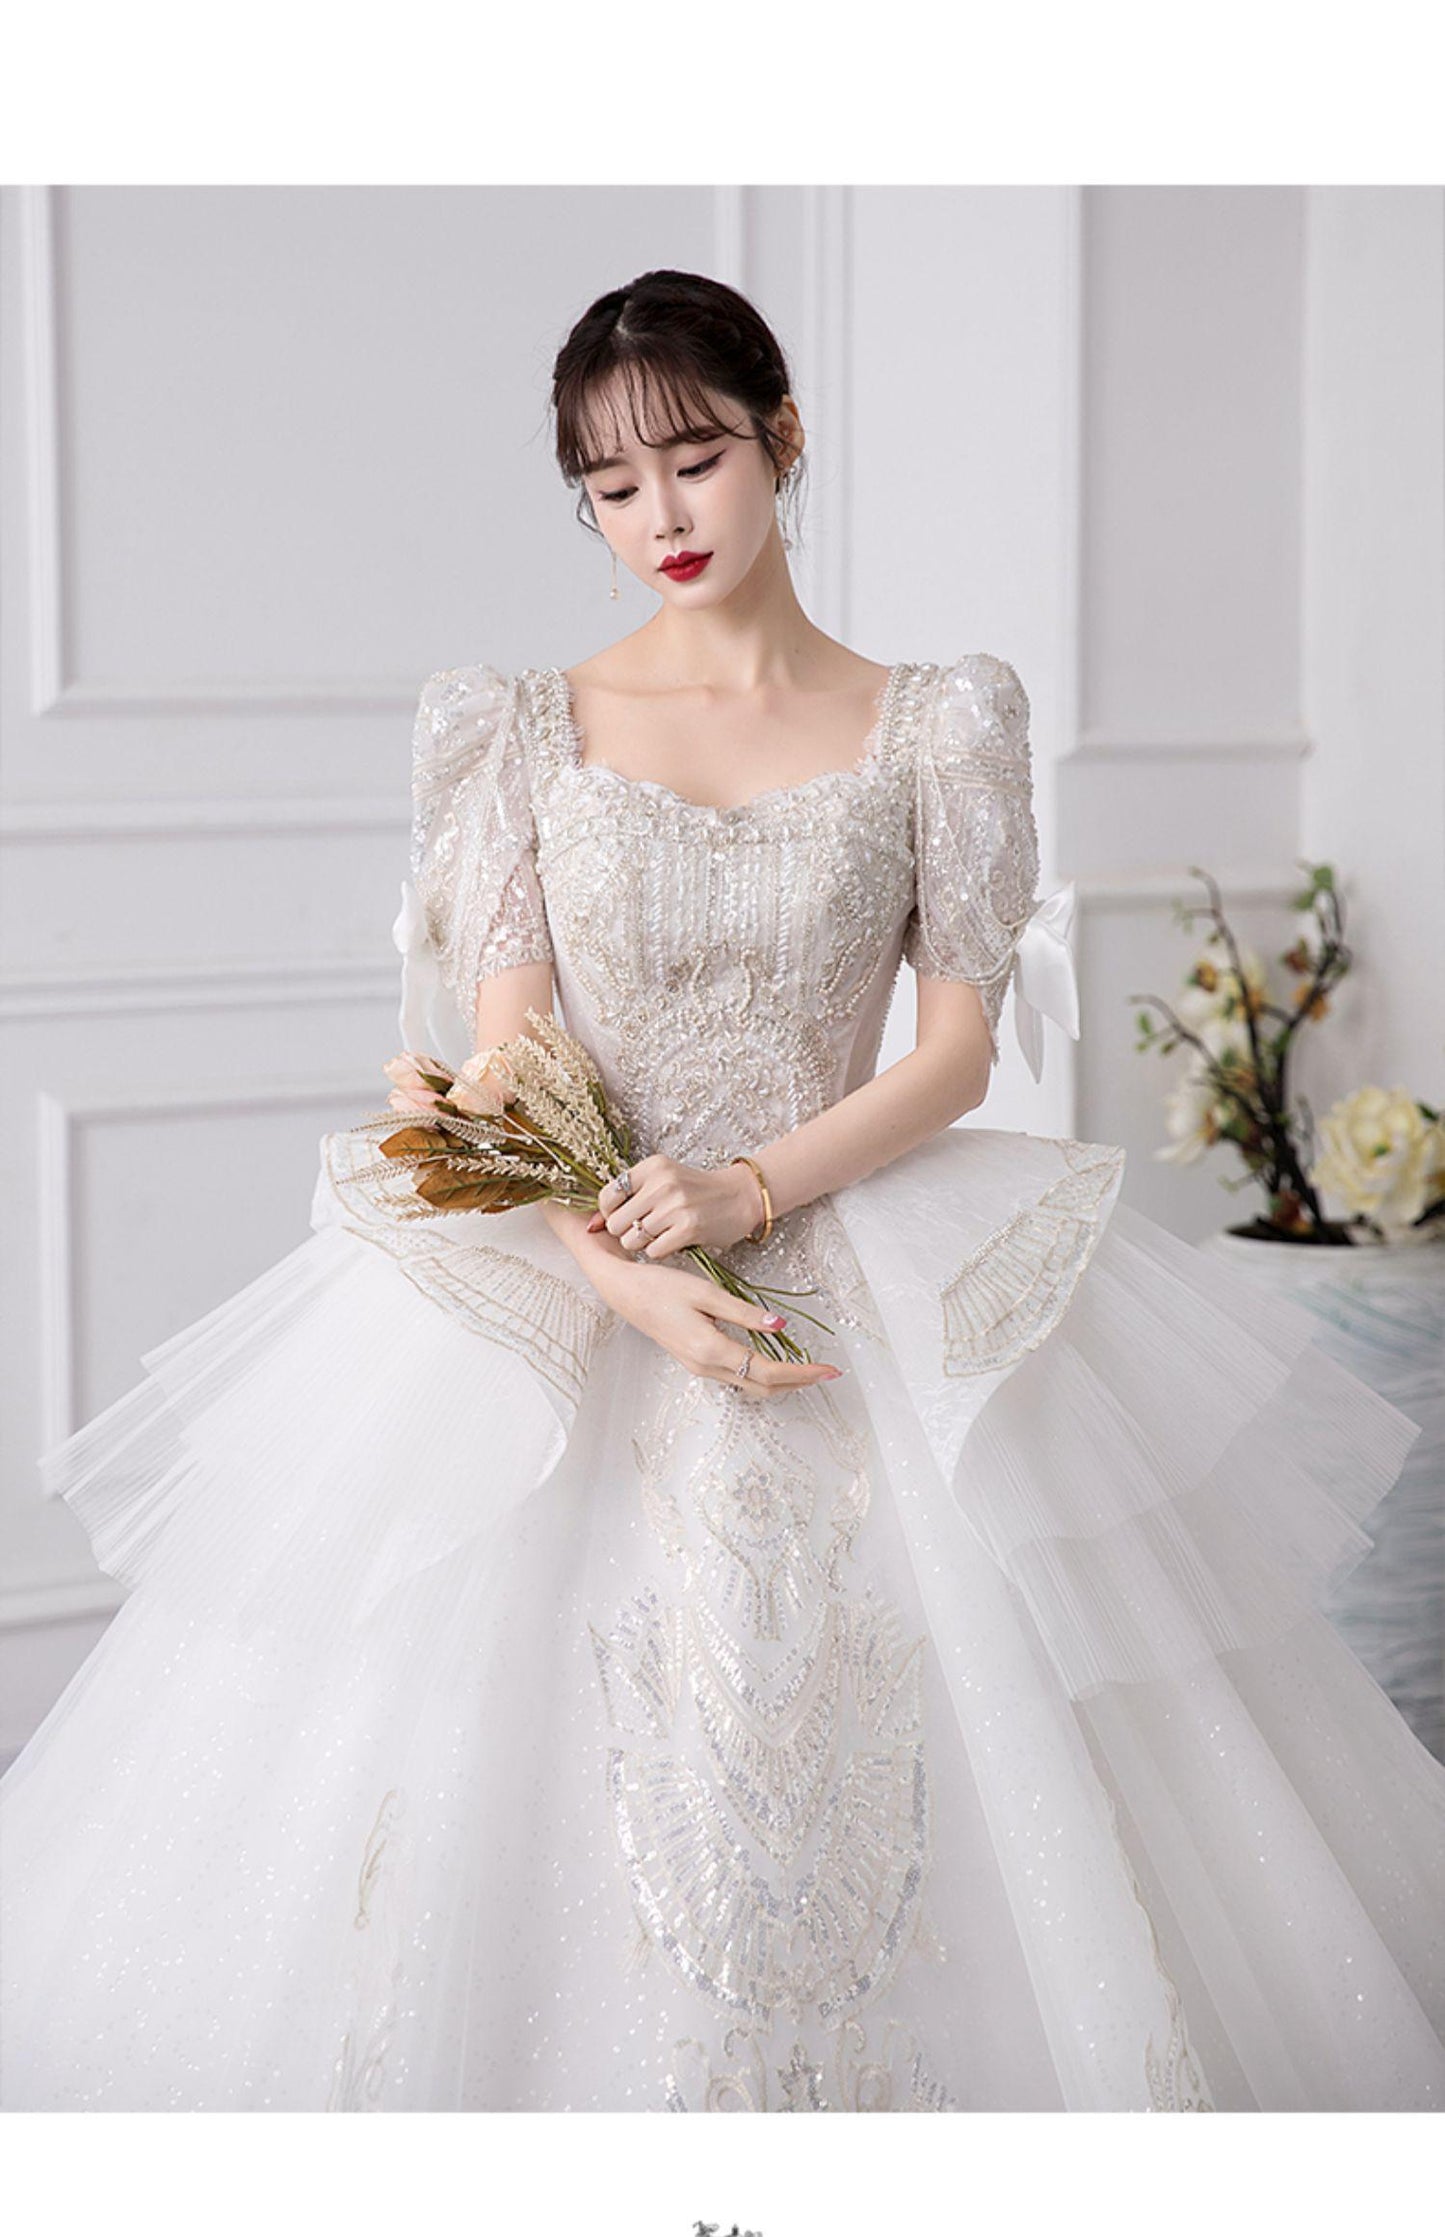 Luxury Short Sleeve With Bow Lace Up Bridal Ball Gown